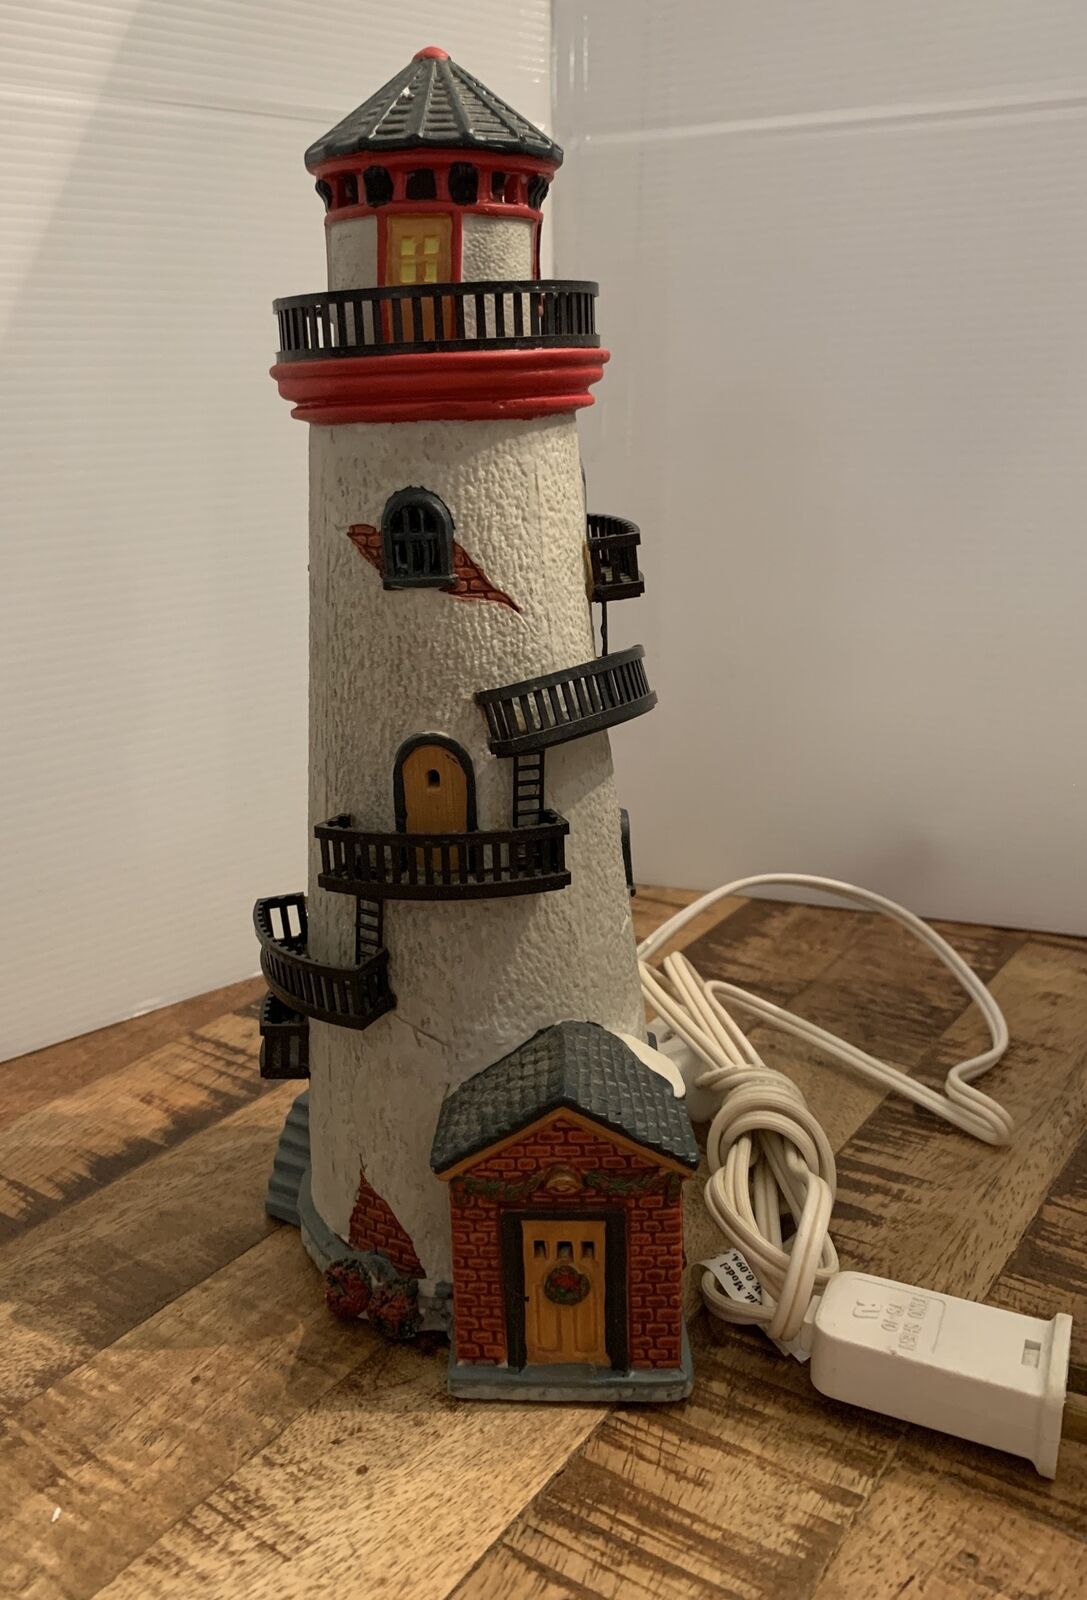 1998 Lemax Plymouth Corners Misty Harbor Lighthouse Item #75244 Retired